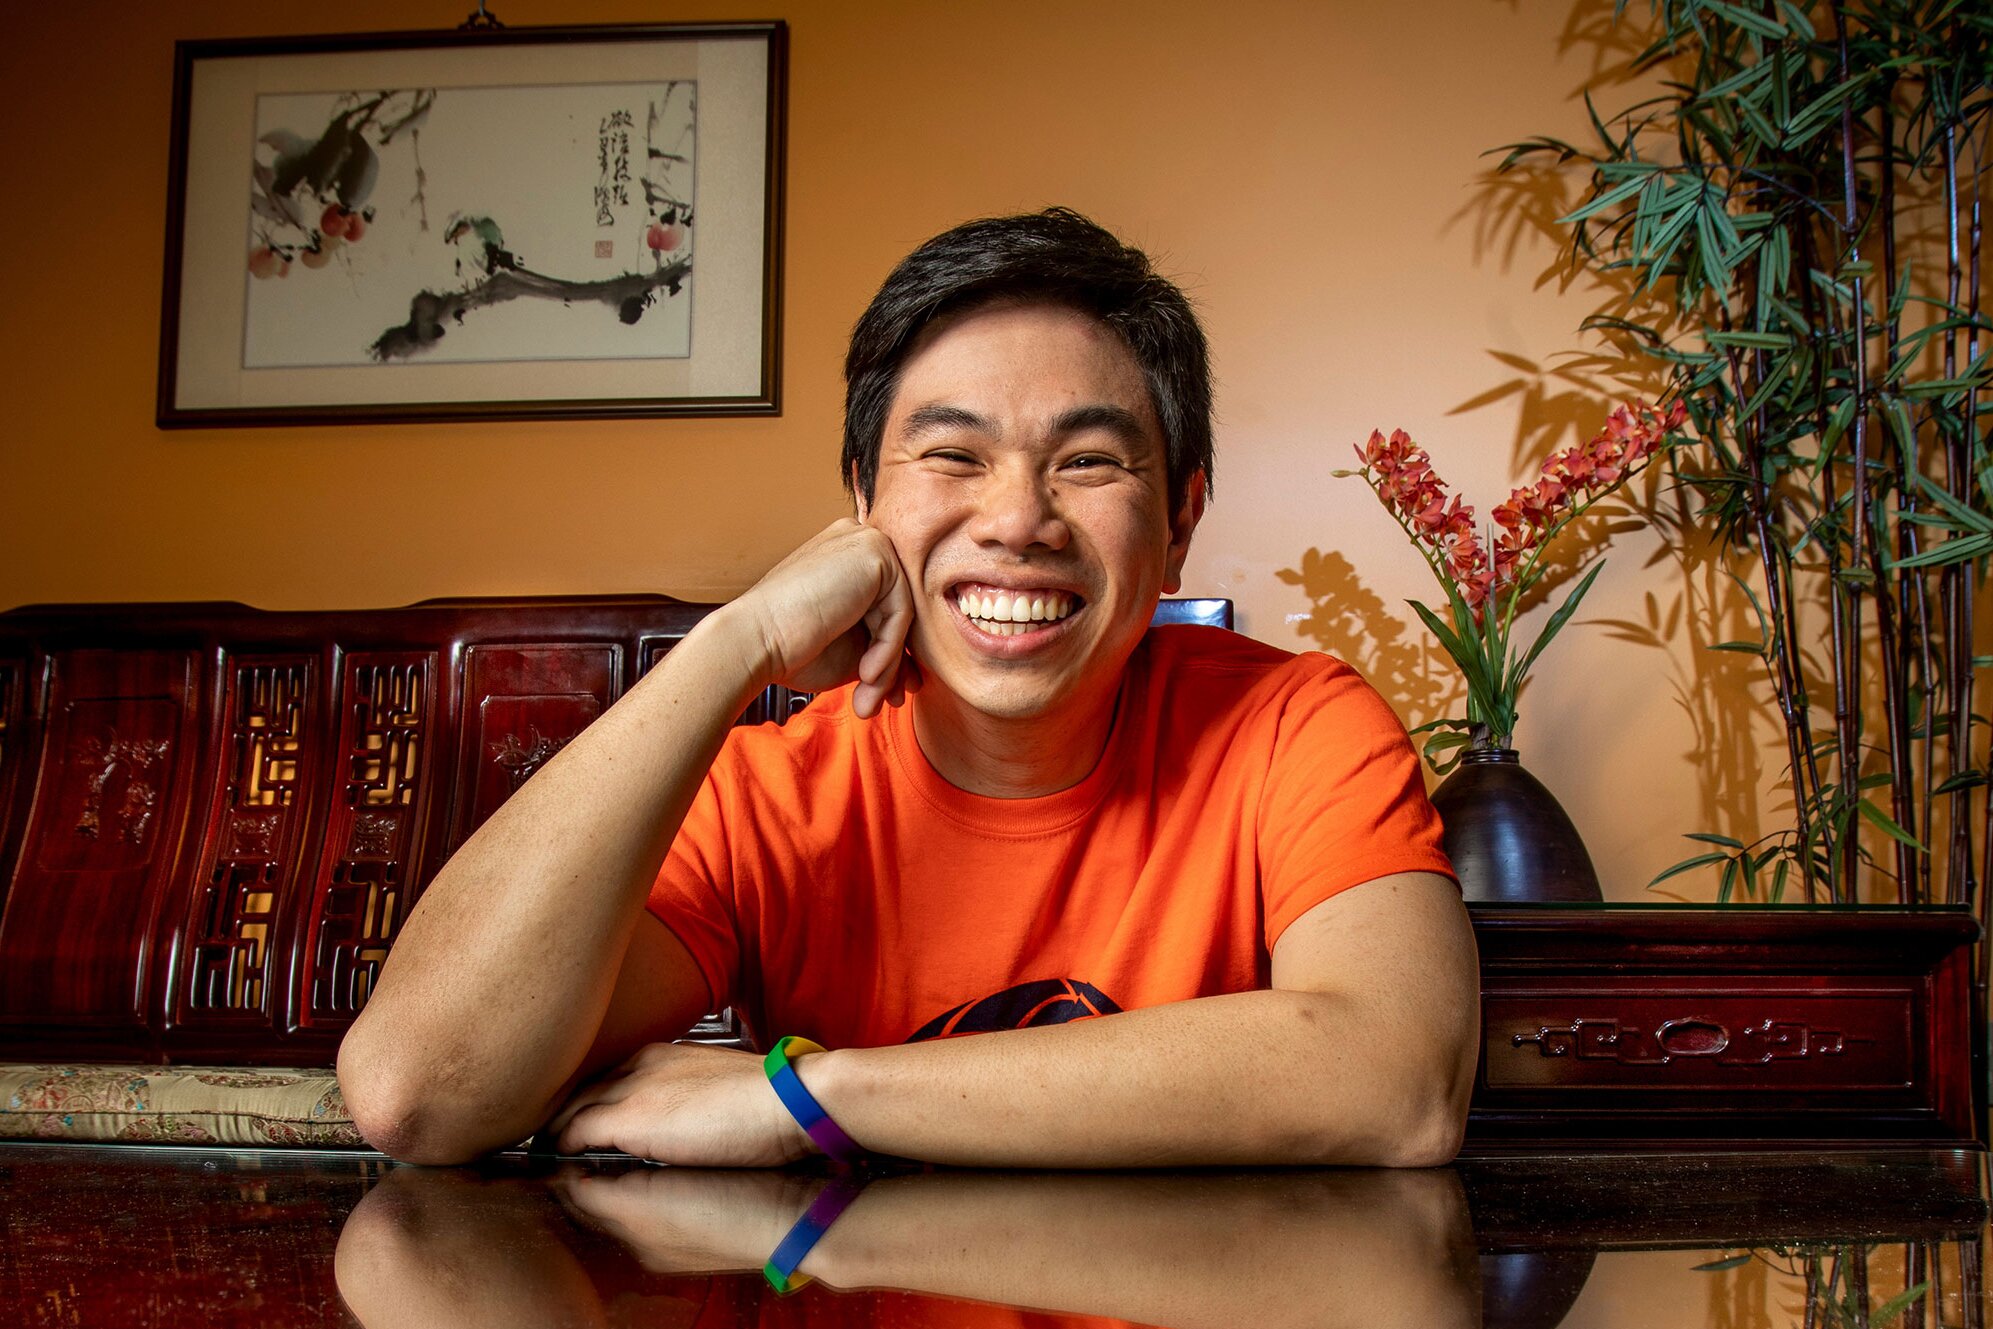 Male student smiling and posing in the Asian American Cultural Center